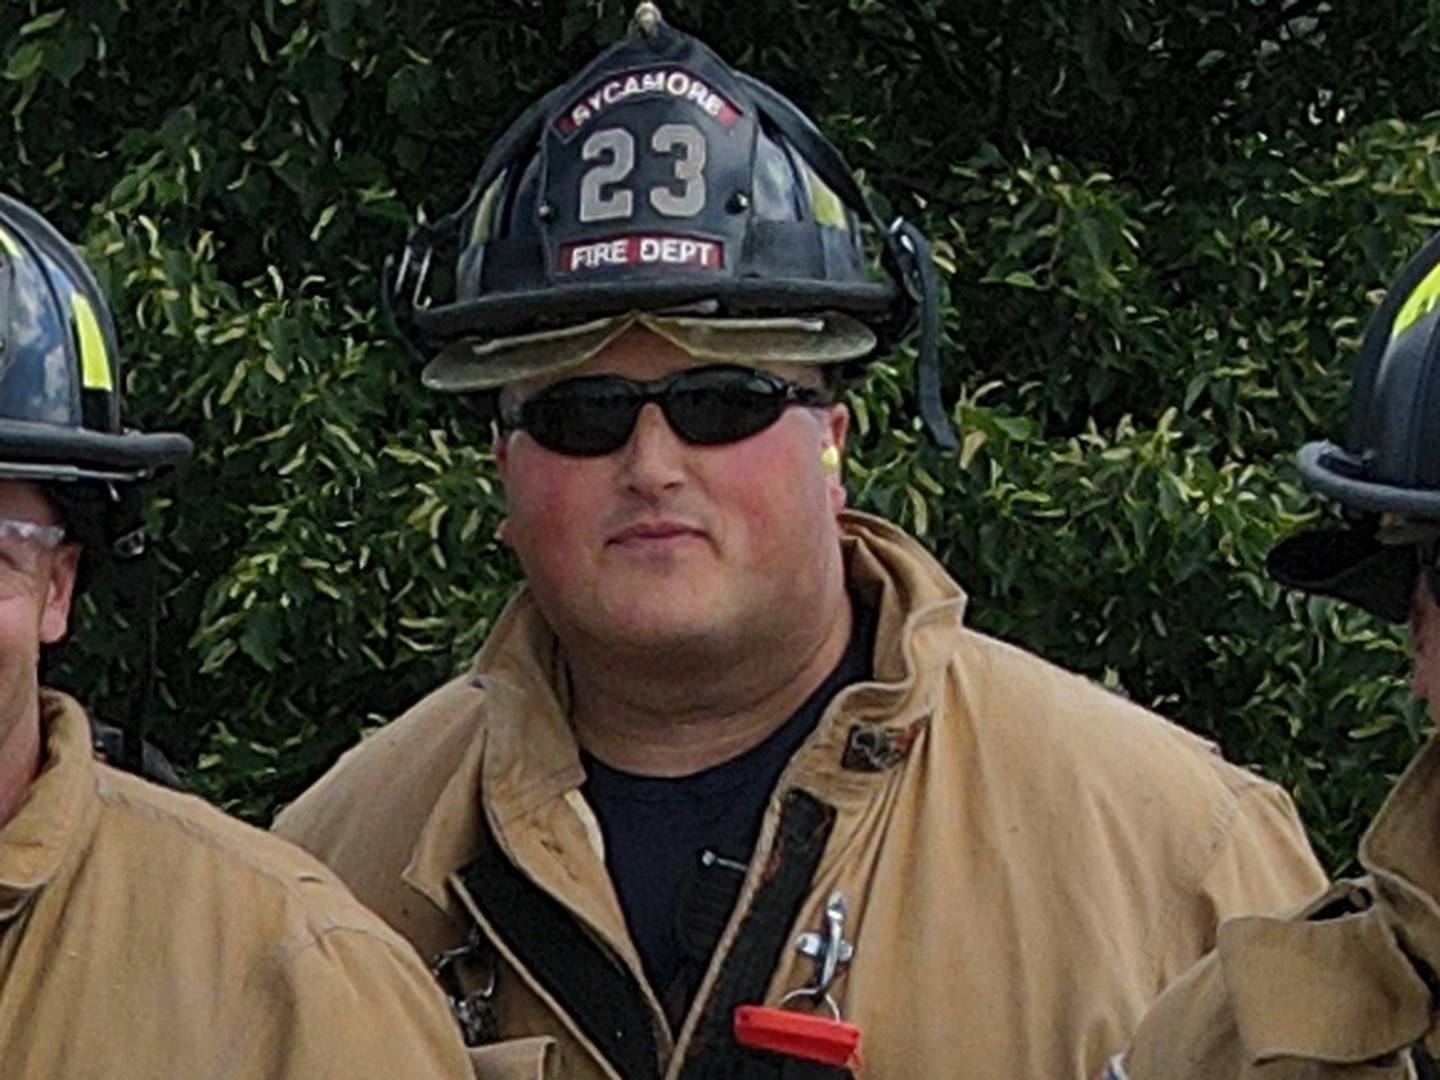 Sycamore firefighter Brad Belanger died Friday, Dec. 22, 2023, after a battle with esophageal cancer, the Sycamore Fire Department announced.